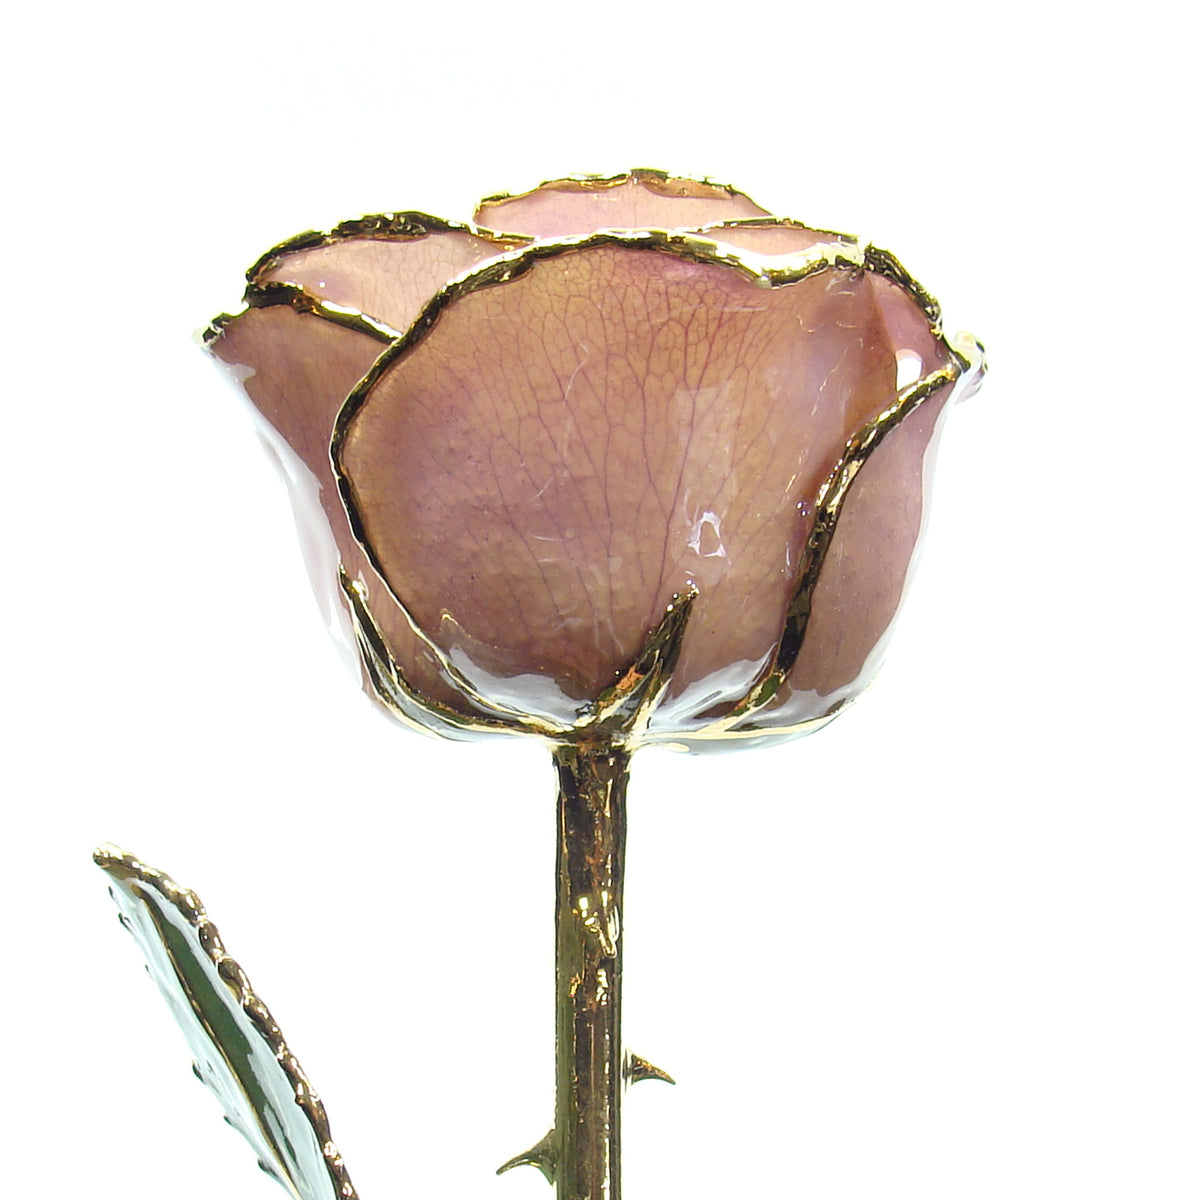 24K Gold Trimmed Forever Rose with Lavender Petals which are a light pink or purple color. View of Stem, Leaves, and Rose Petals and Showing Detail of Gold Trim